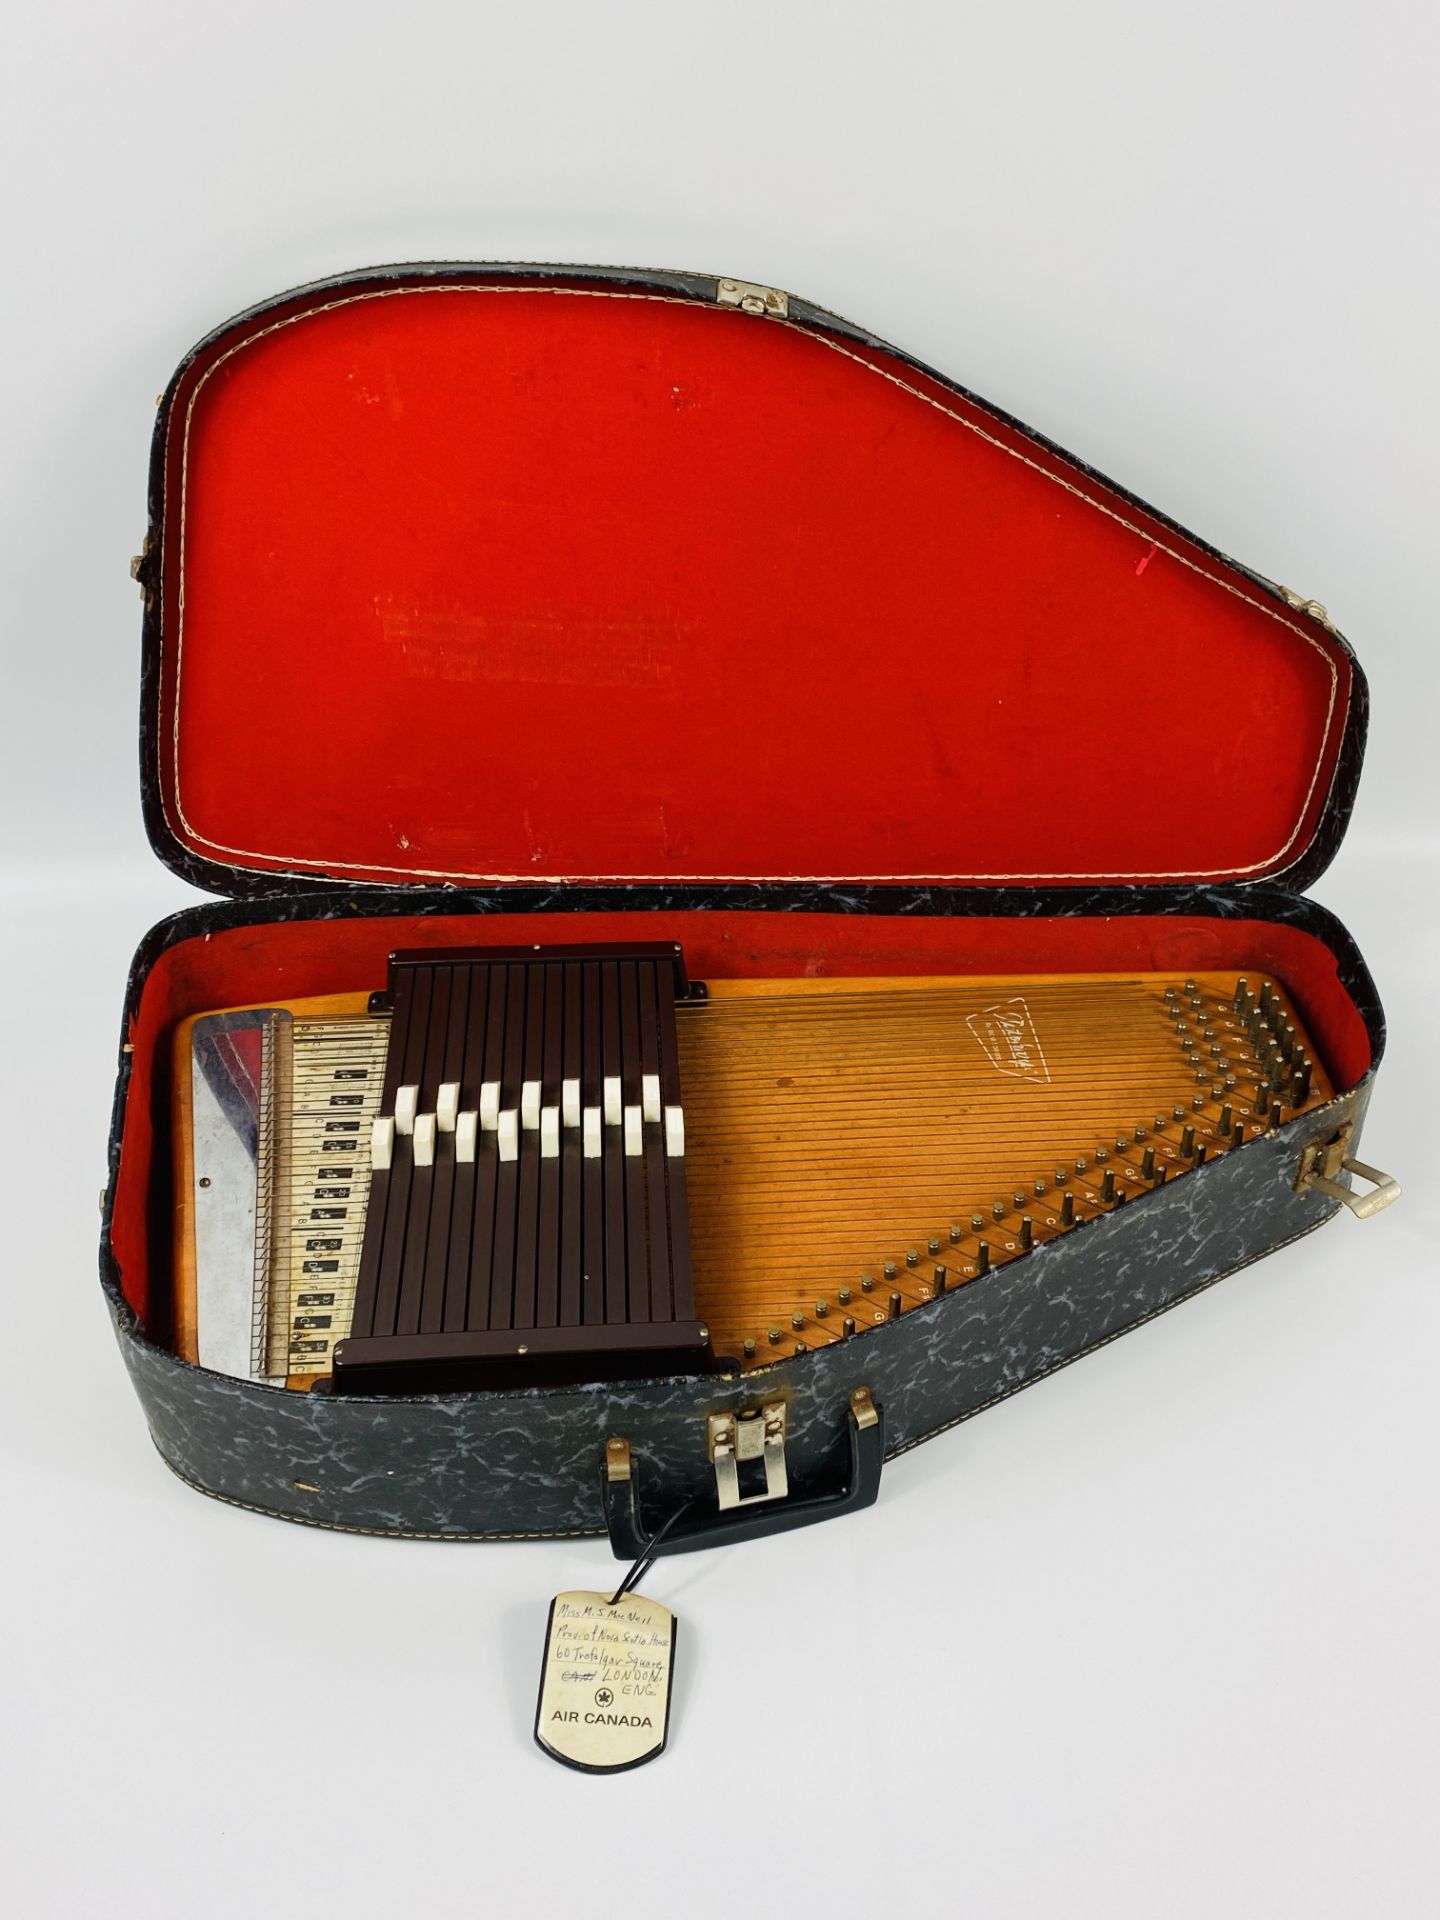 Autoharp in carry case - Image 6 of 7